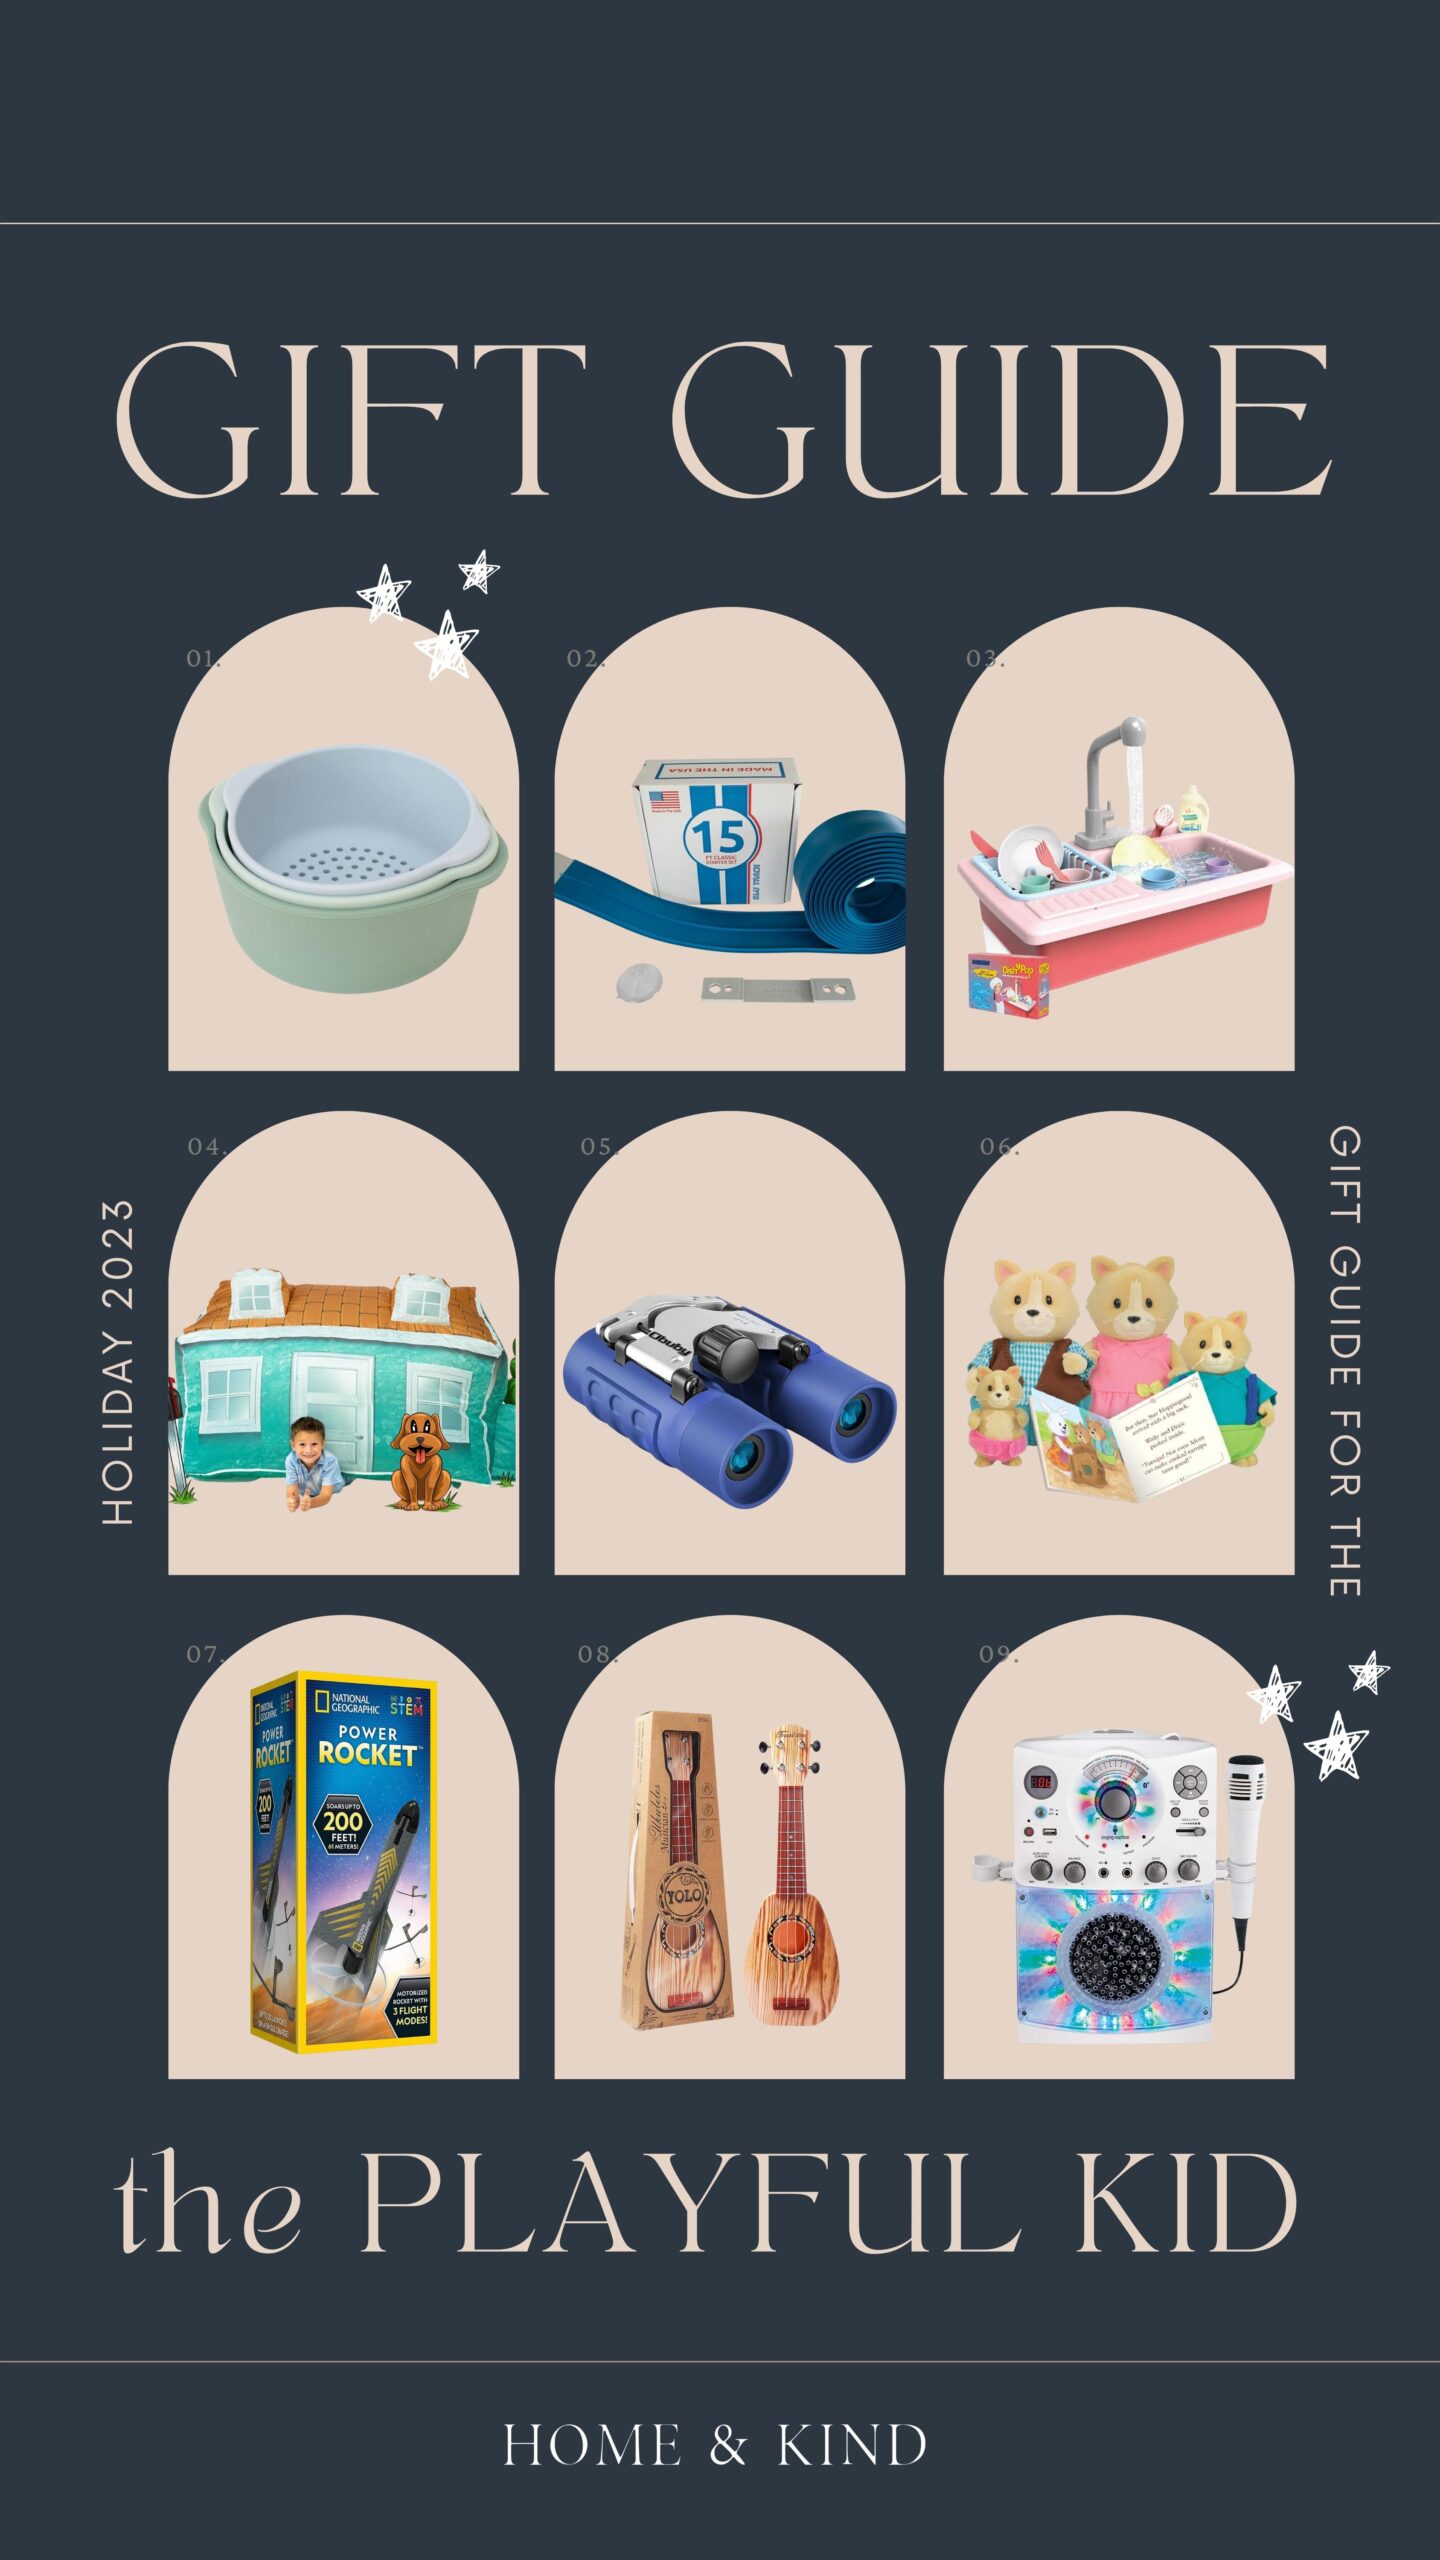 Playful Kid gift guide roundup